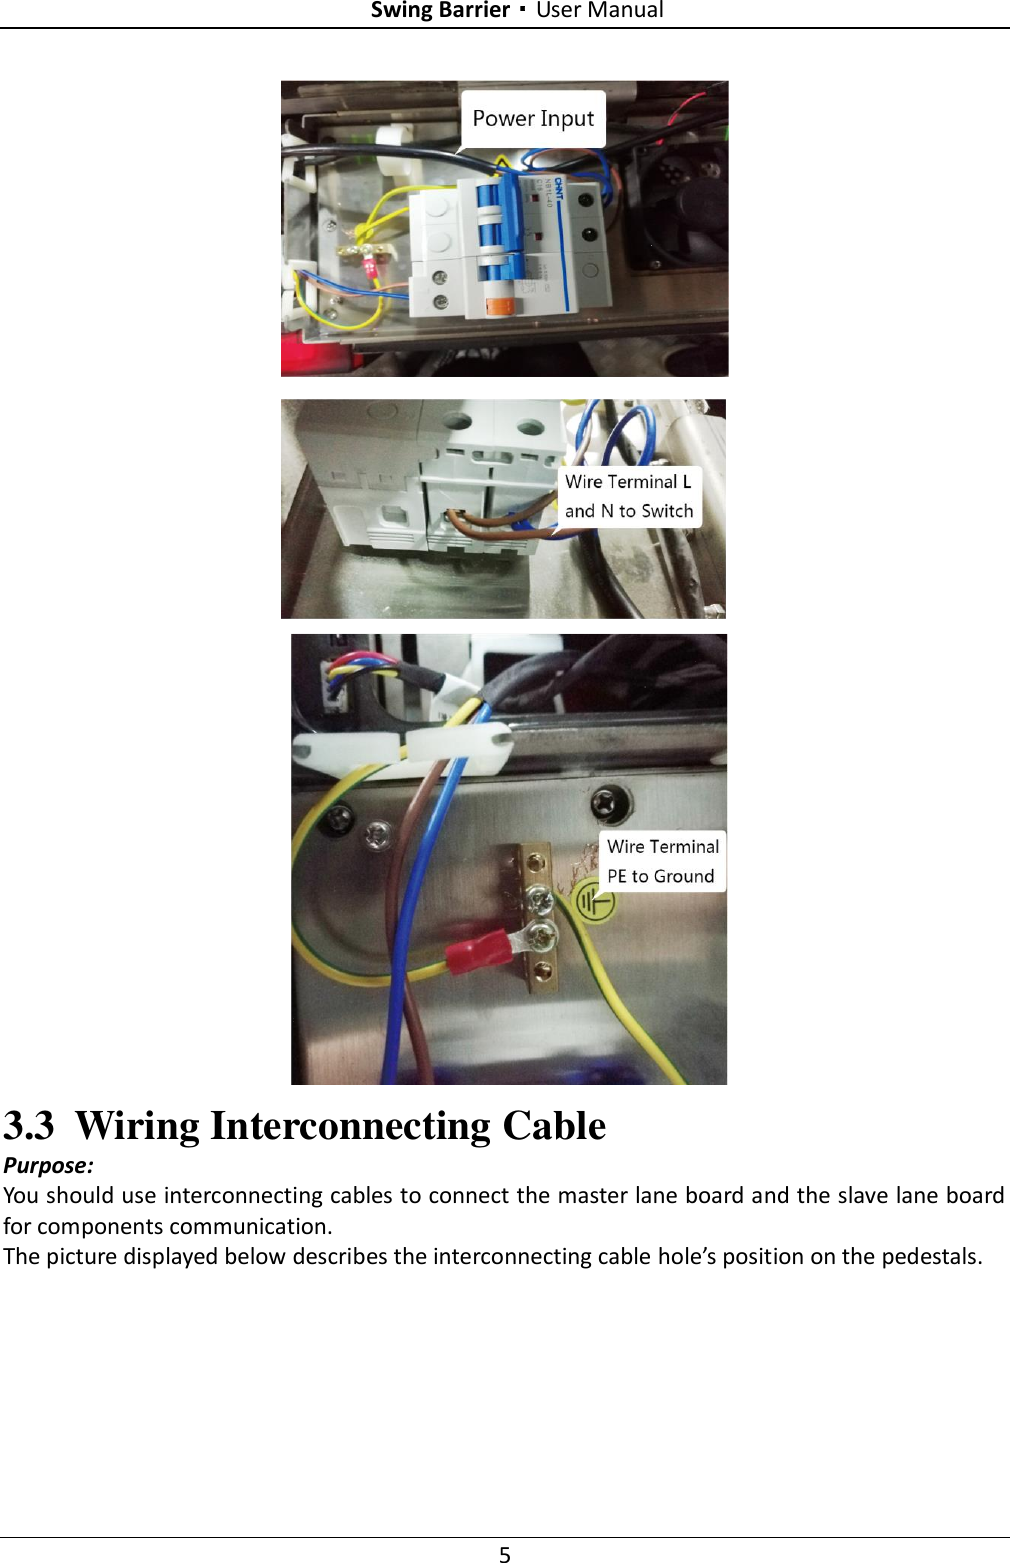 Swing Barrier·User Manual 5  3.3 Wiring Interconnecting Cable Purpose: You should use interconnecting cables to connect the master lane board and the slave lane board for components communication. The picture displayed below describes the interconnecting cable hole’s position on the pedestals. 